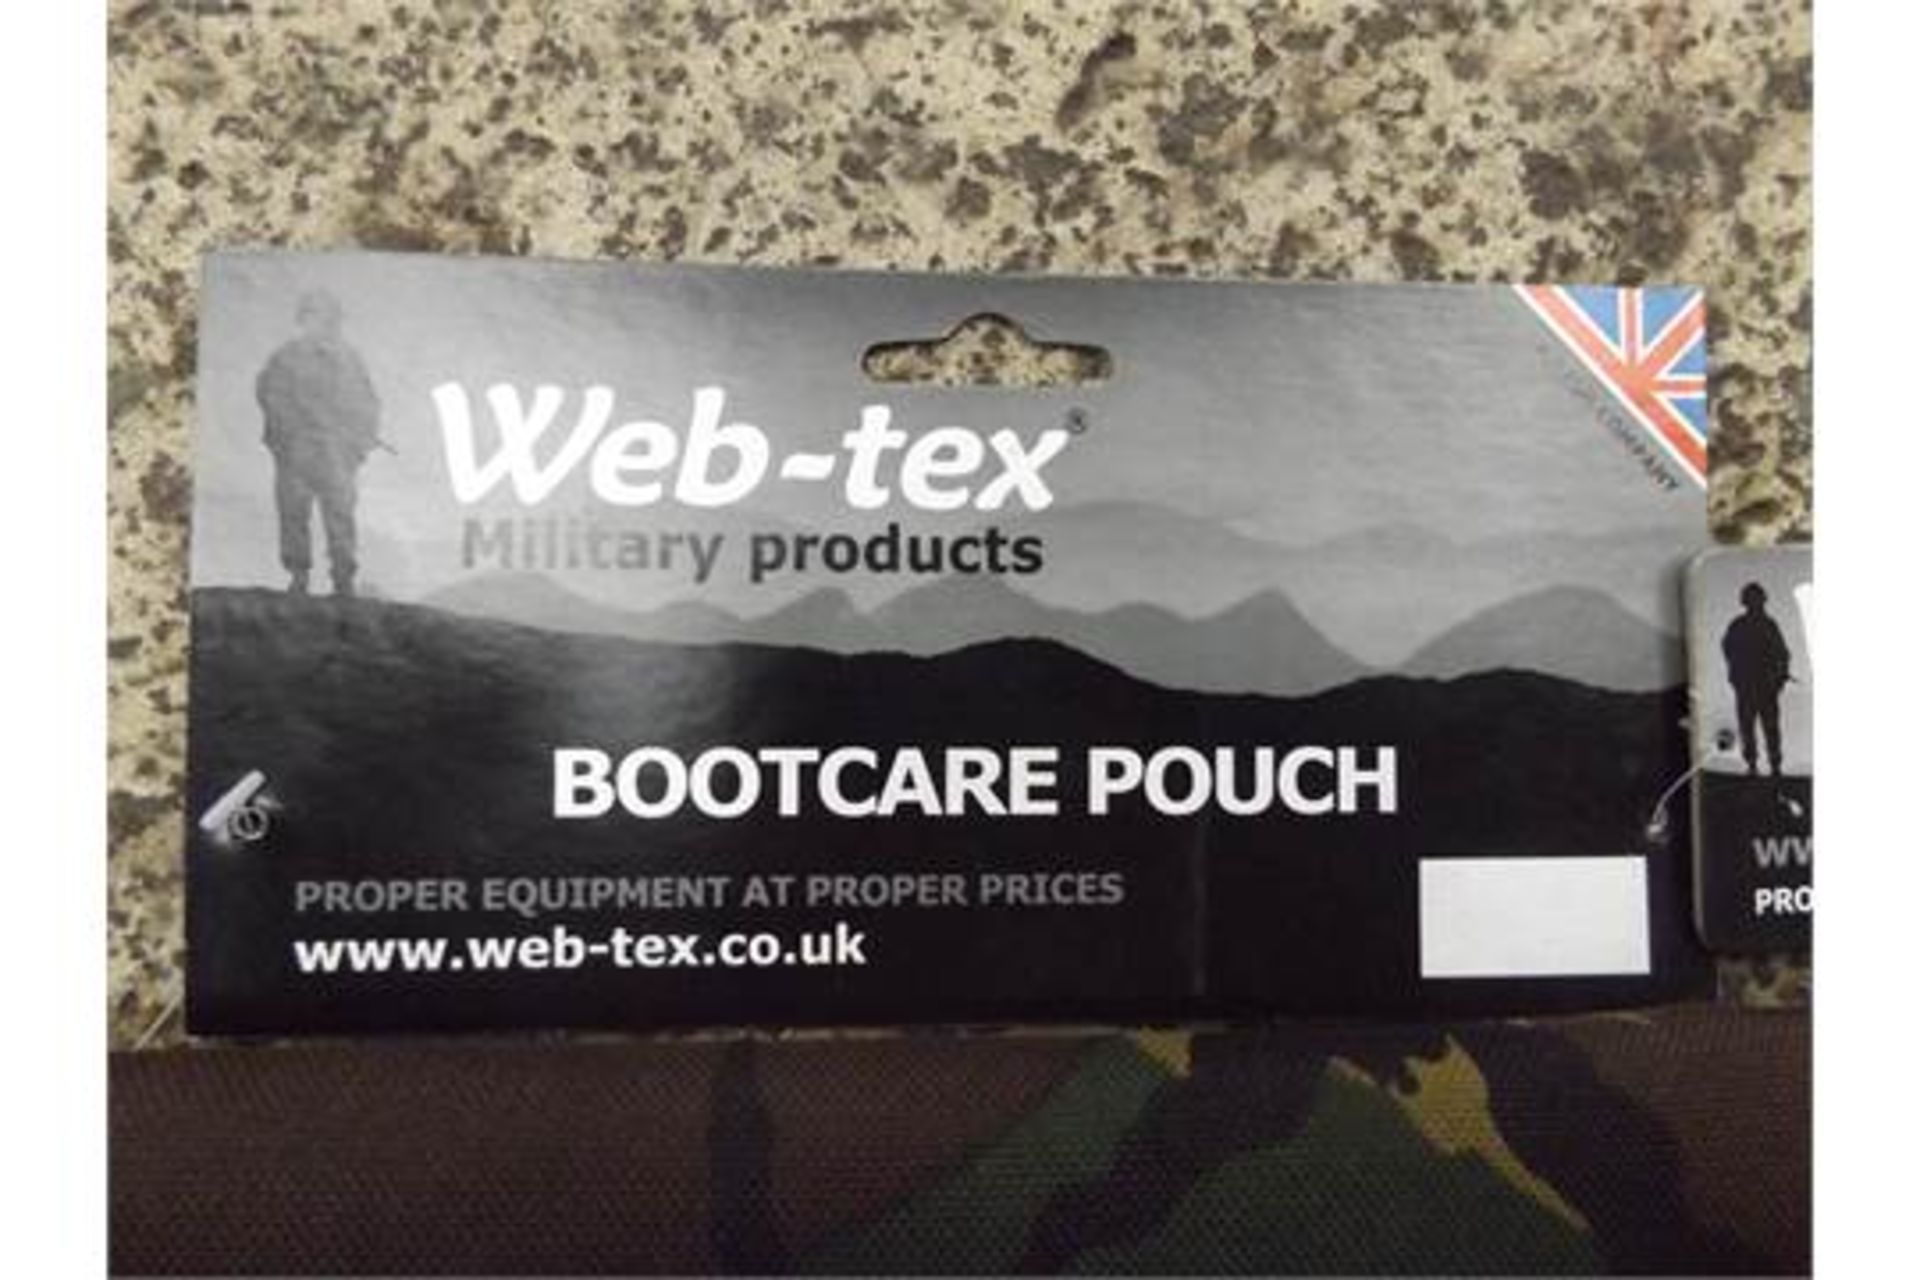 50 x Web-Tex Bootcare Pouches - Image 4 of 4